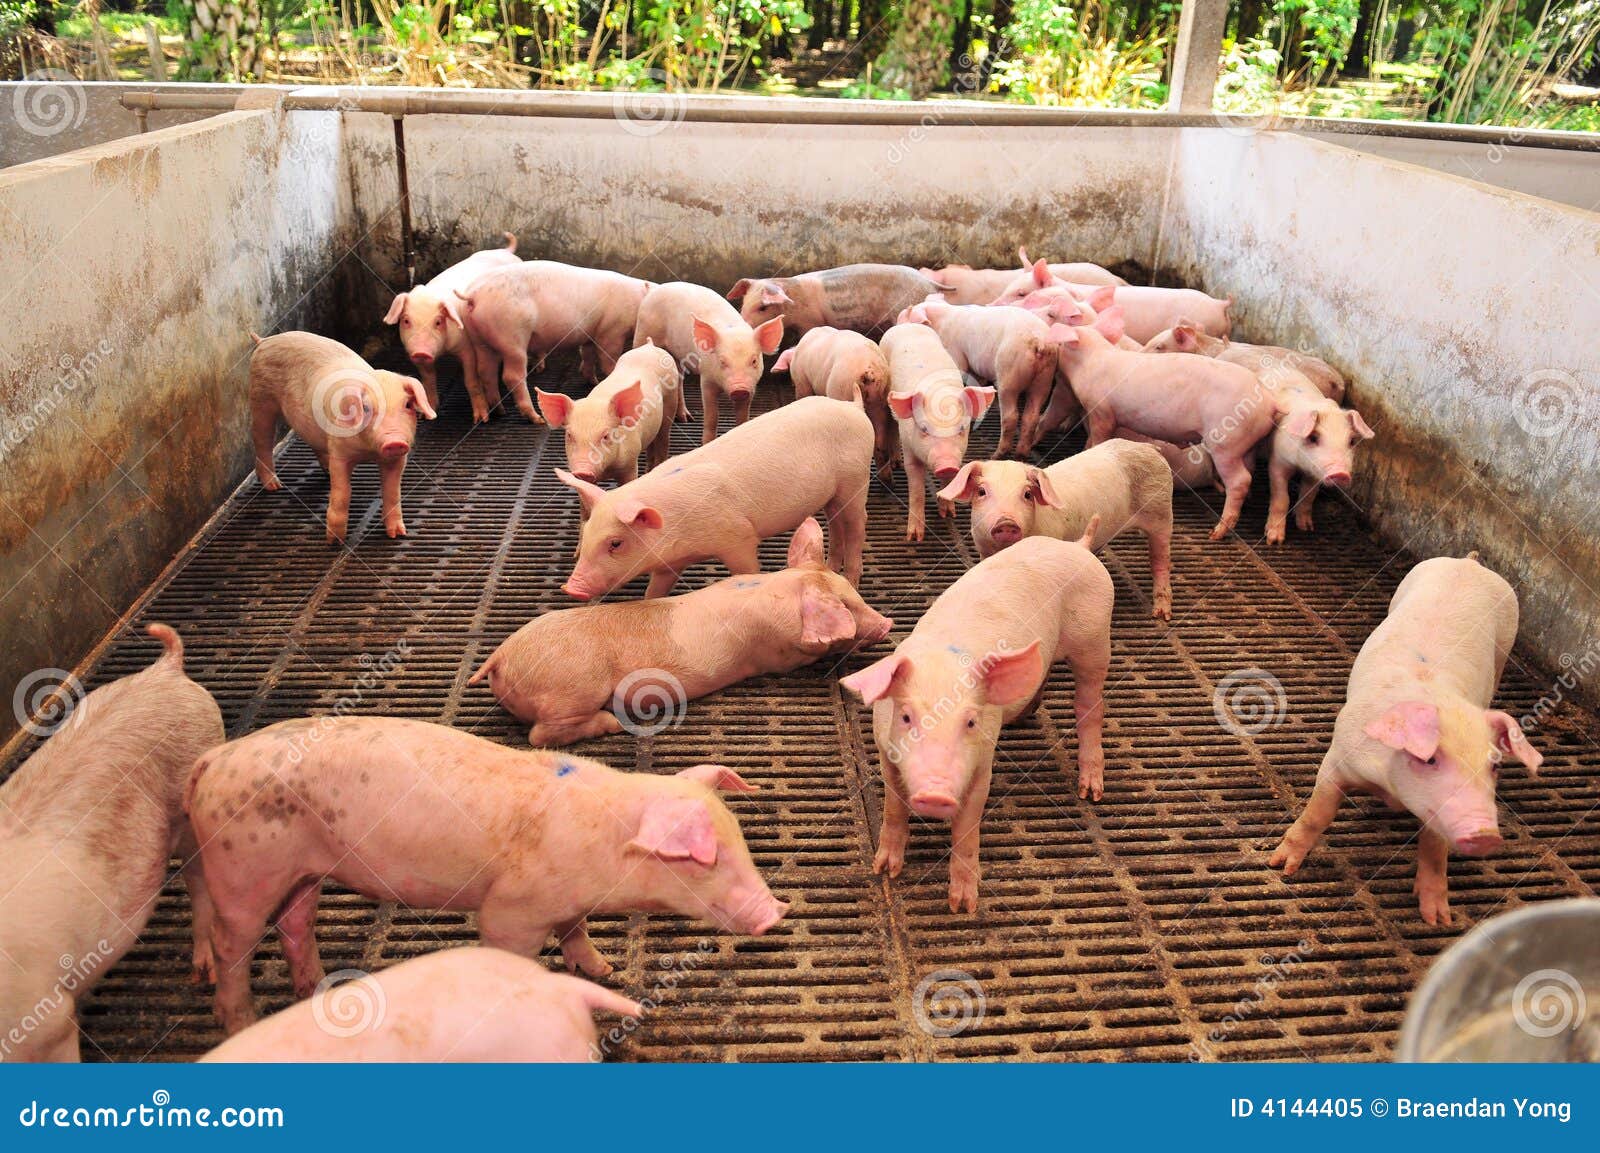 procedures of pig production